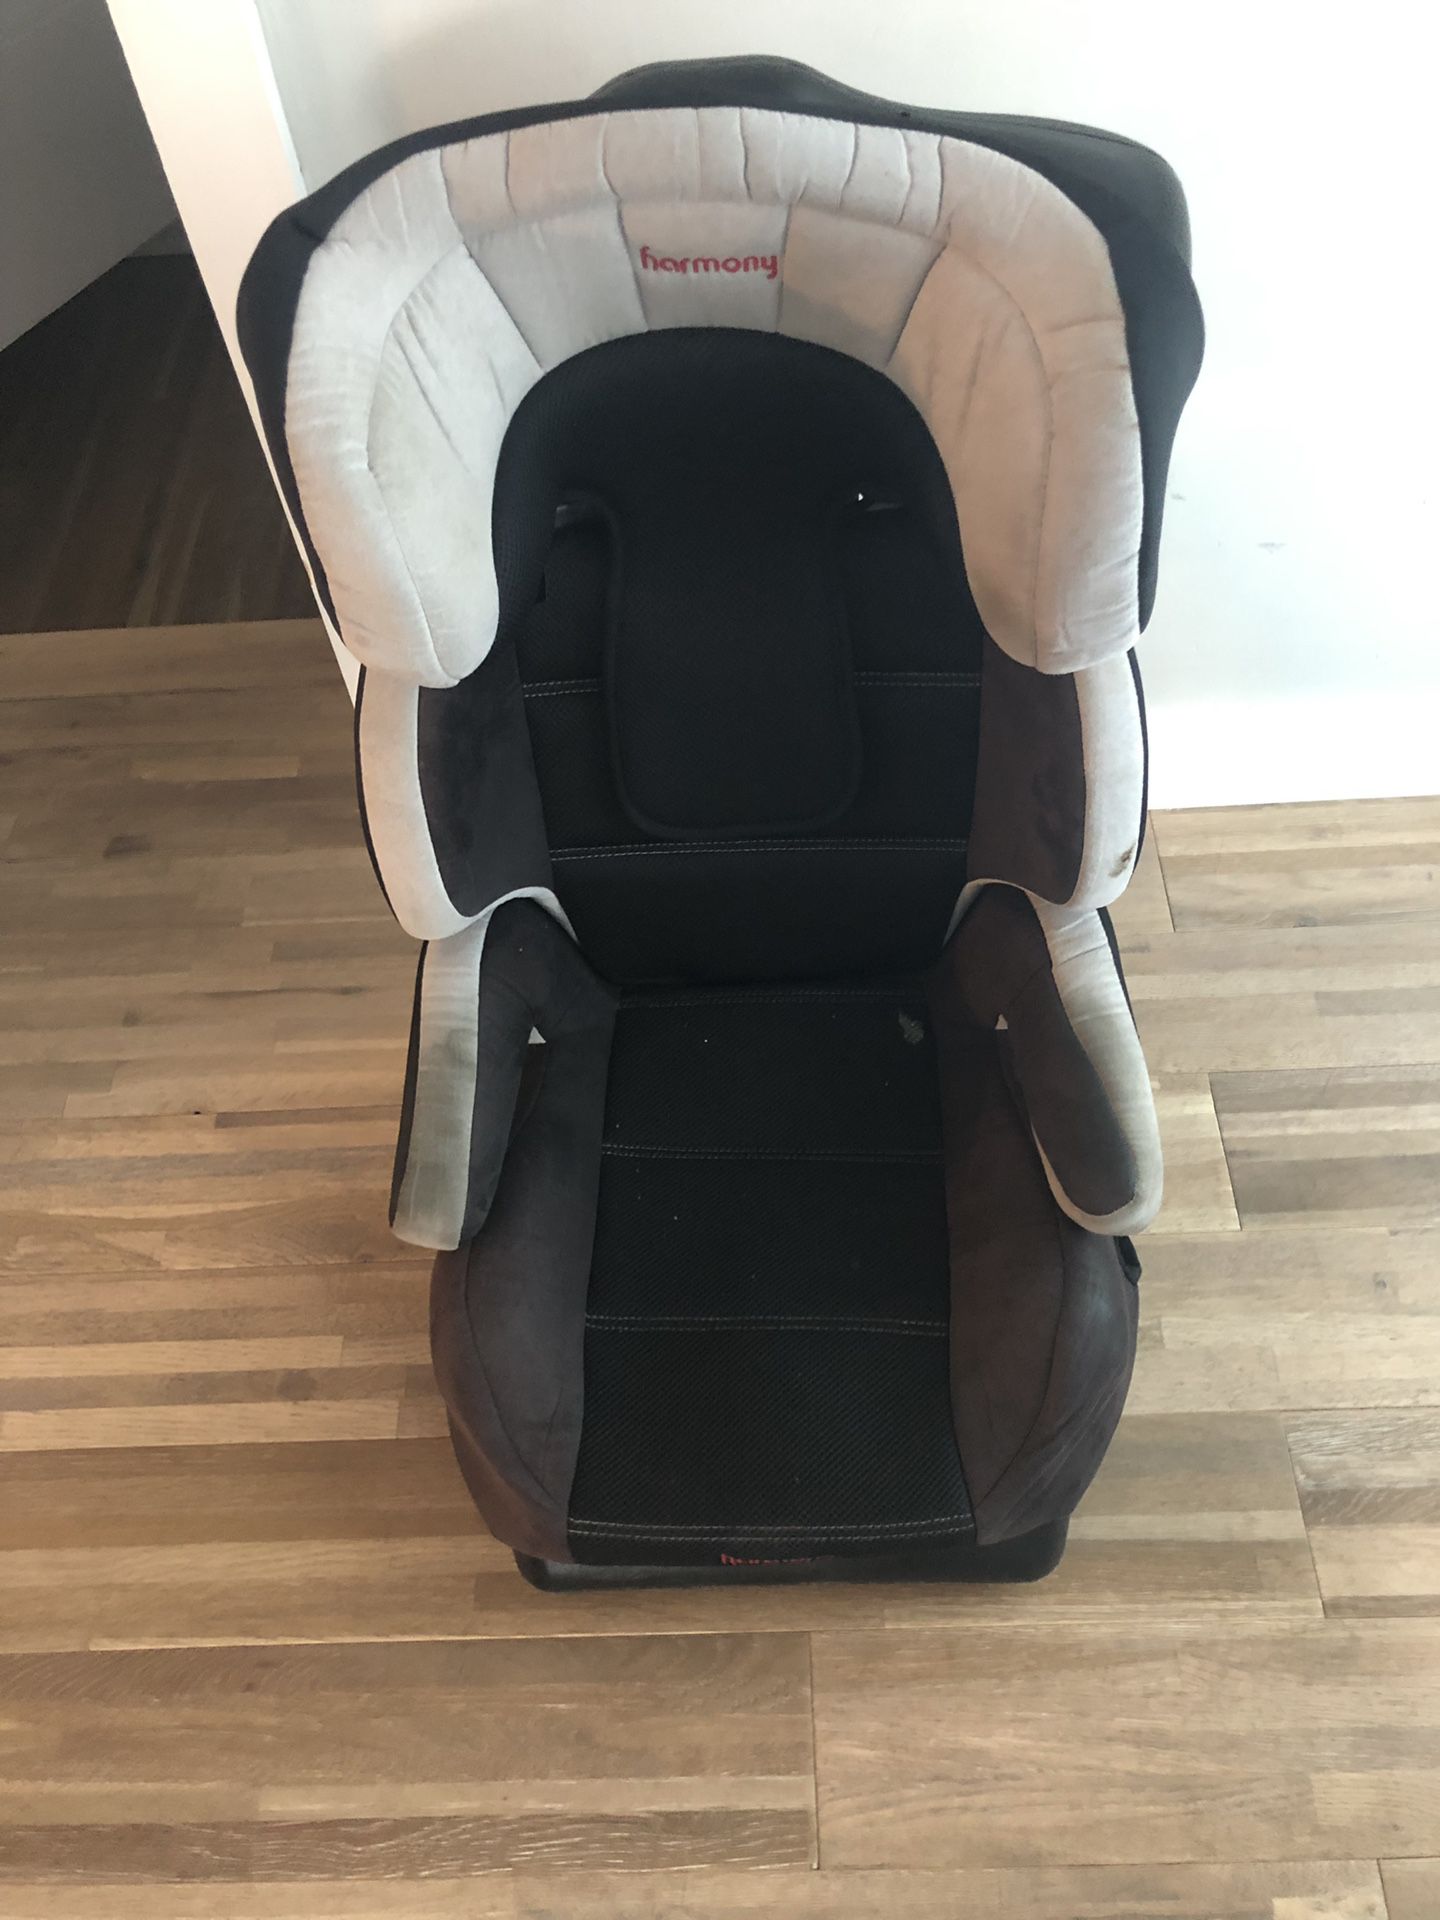 Harmony Booster Car Seat